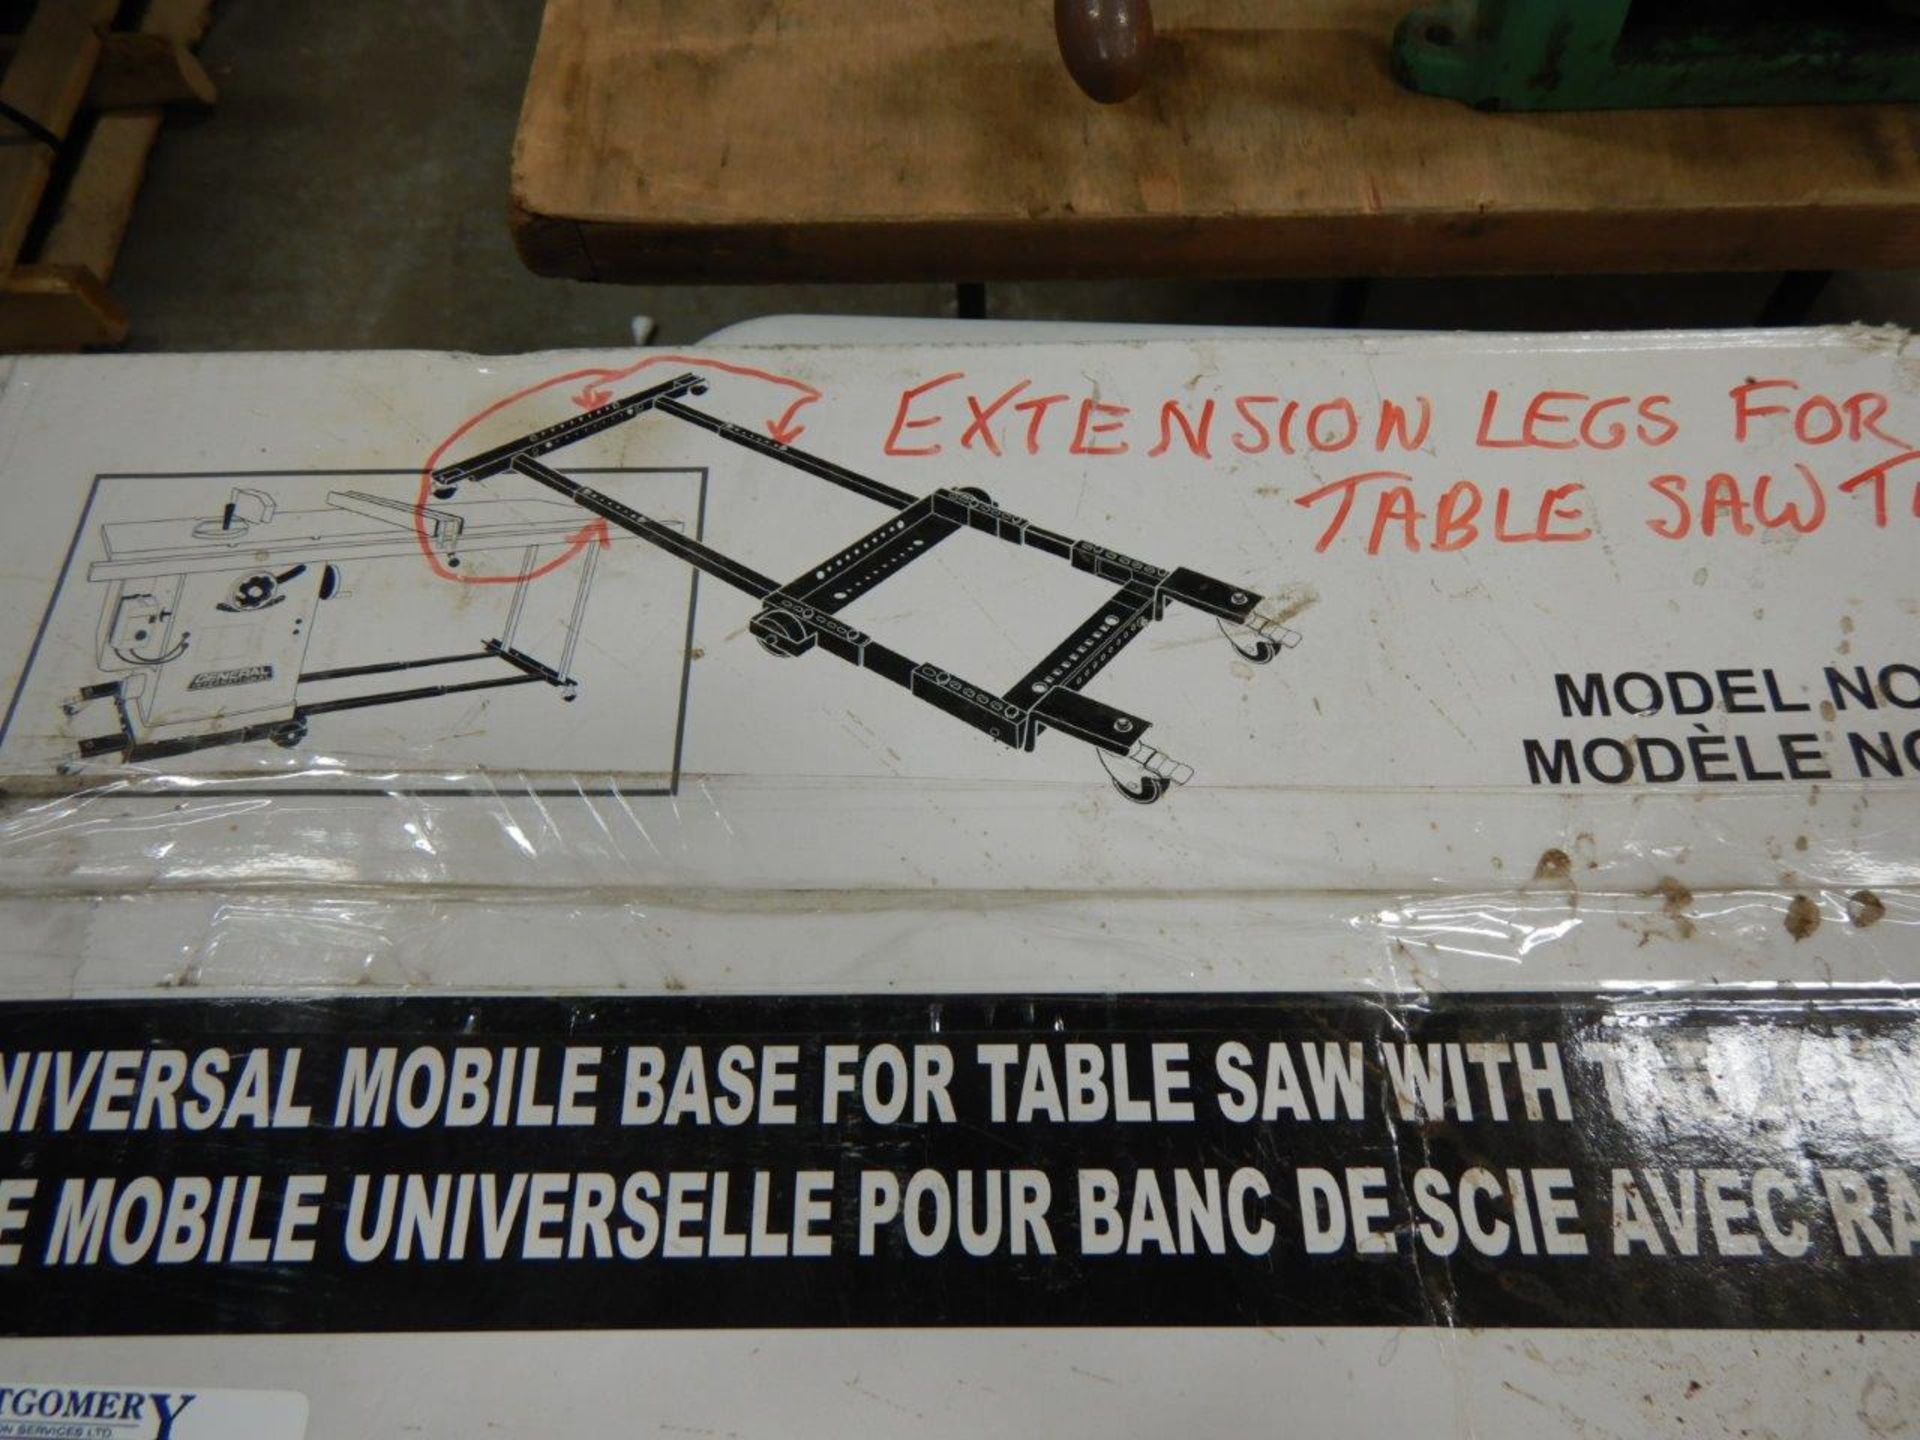 GENERAL INTERNATIONAL UNIVERSAL MOBILE BASE FOR TABLE SAW TABLE EXTENSION & LEGS ONLY